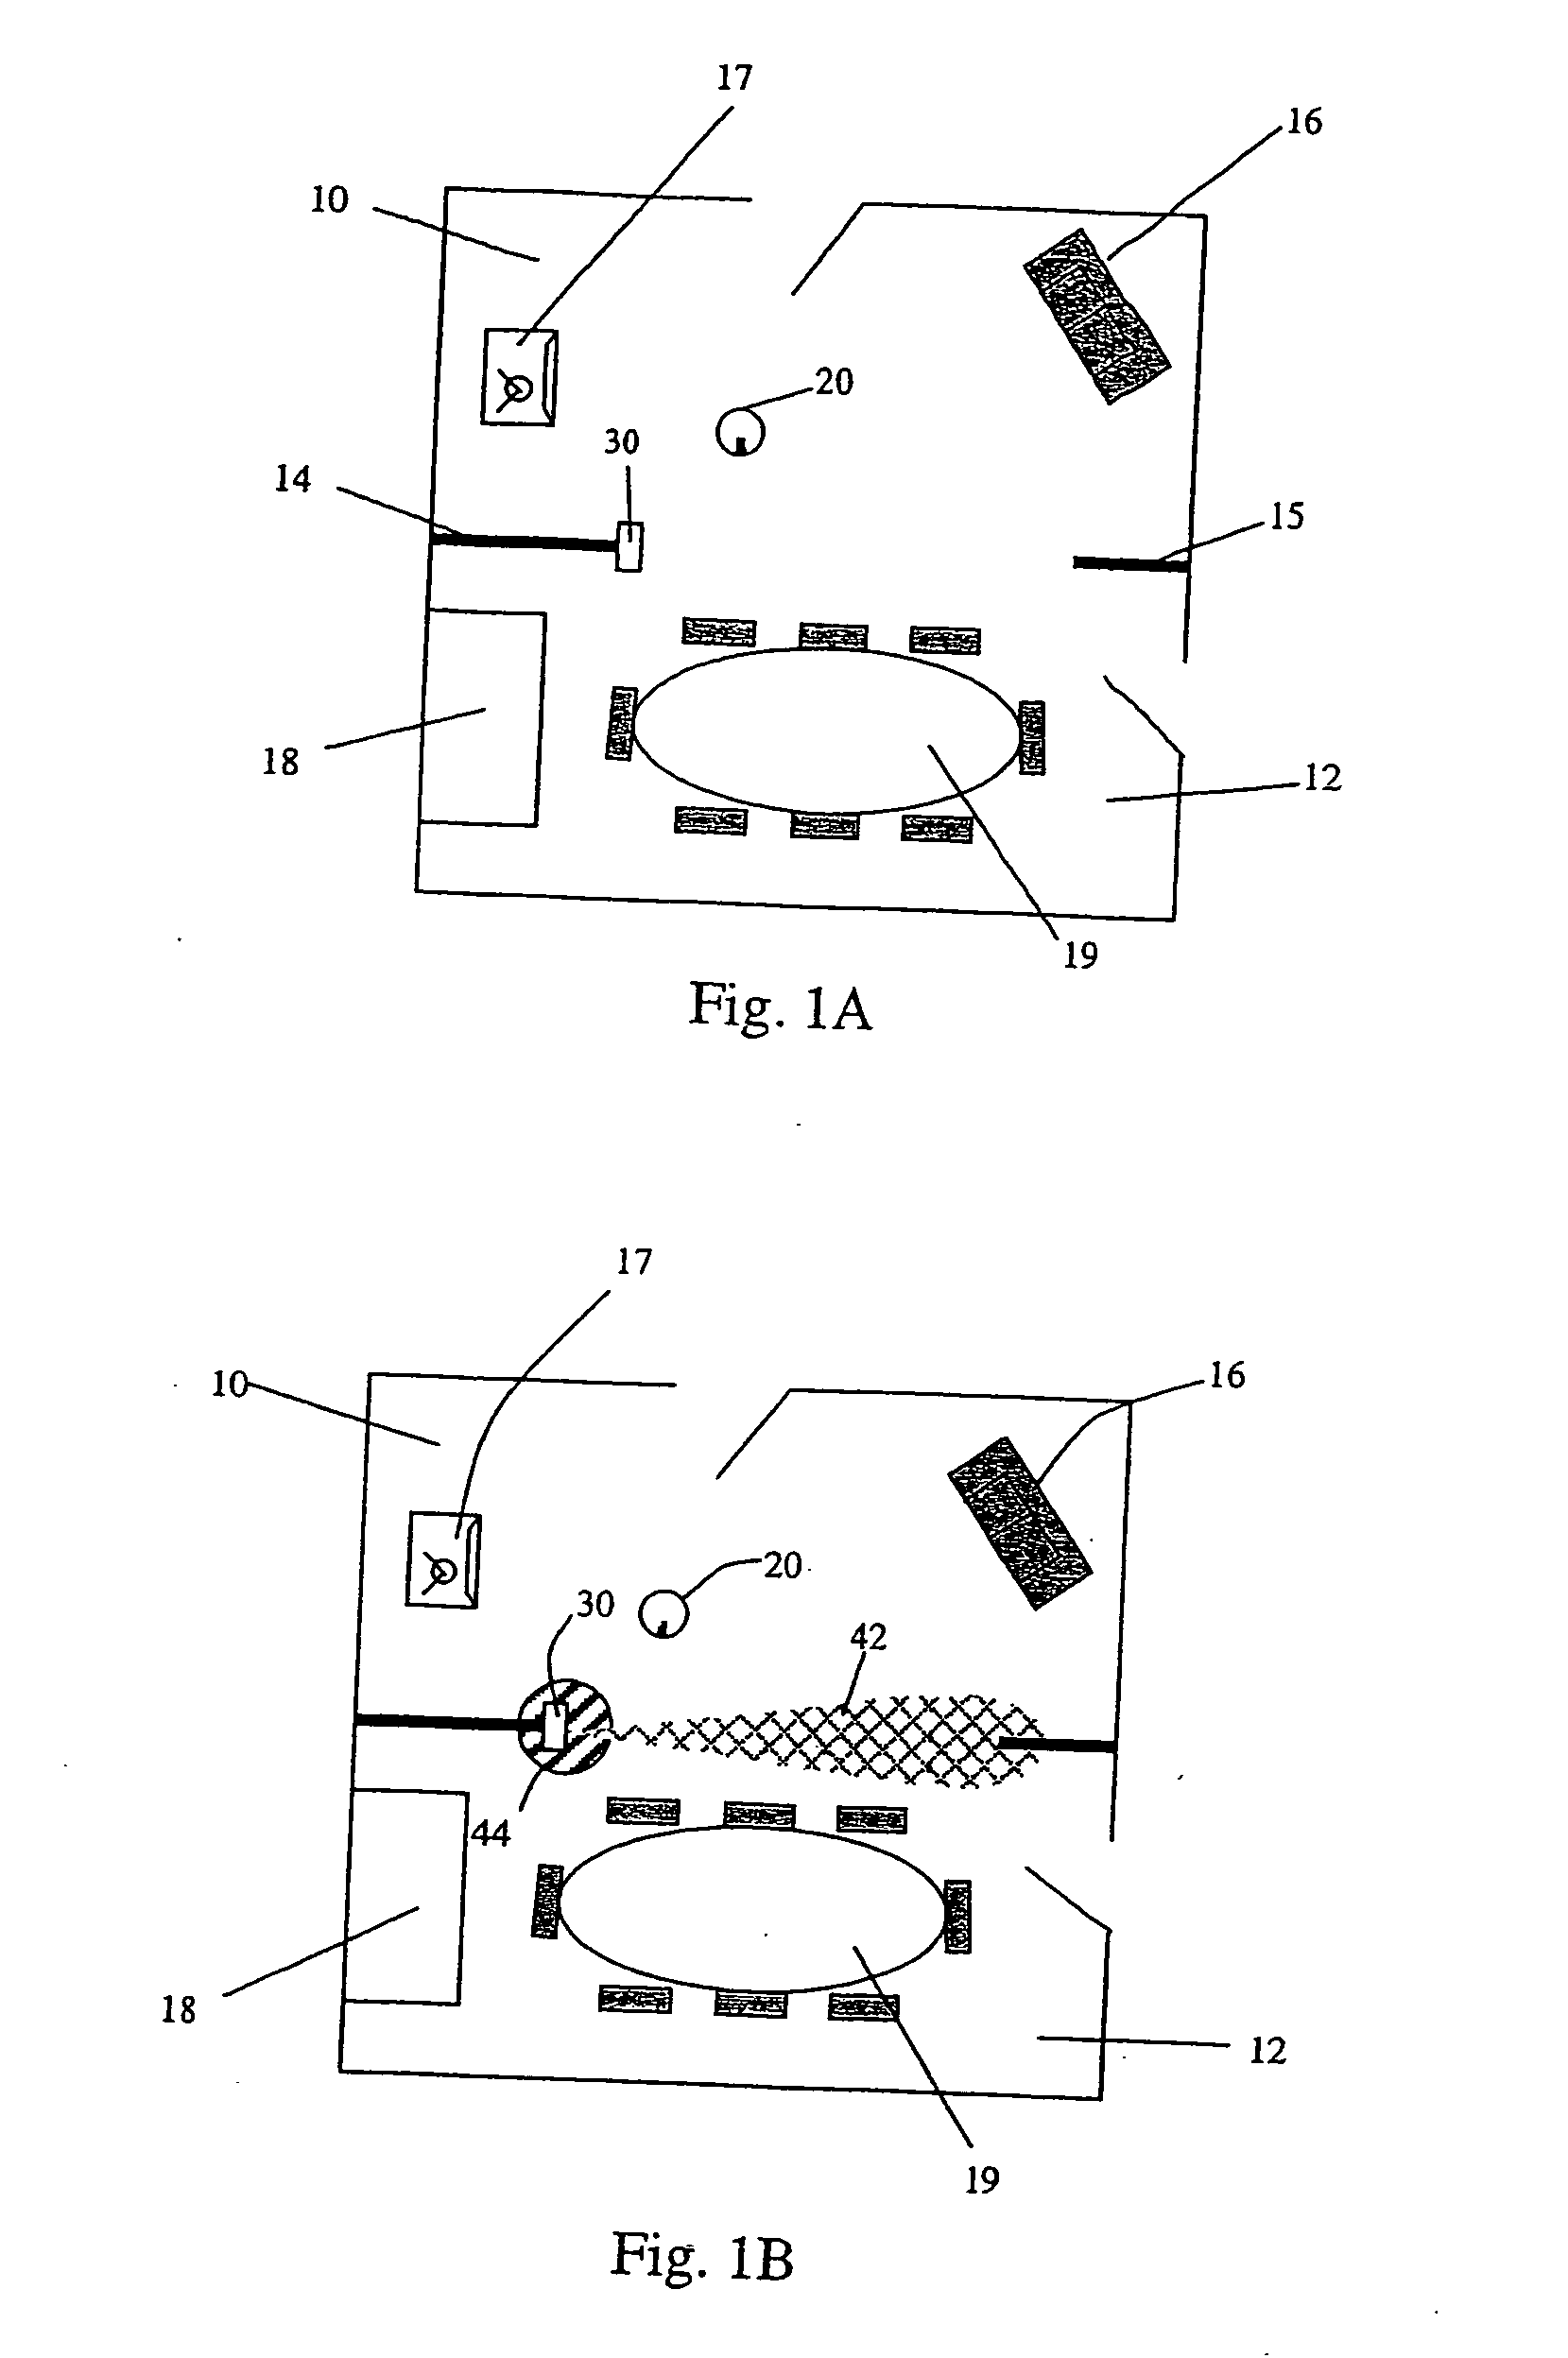 Method and system for robot localization and confinement